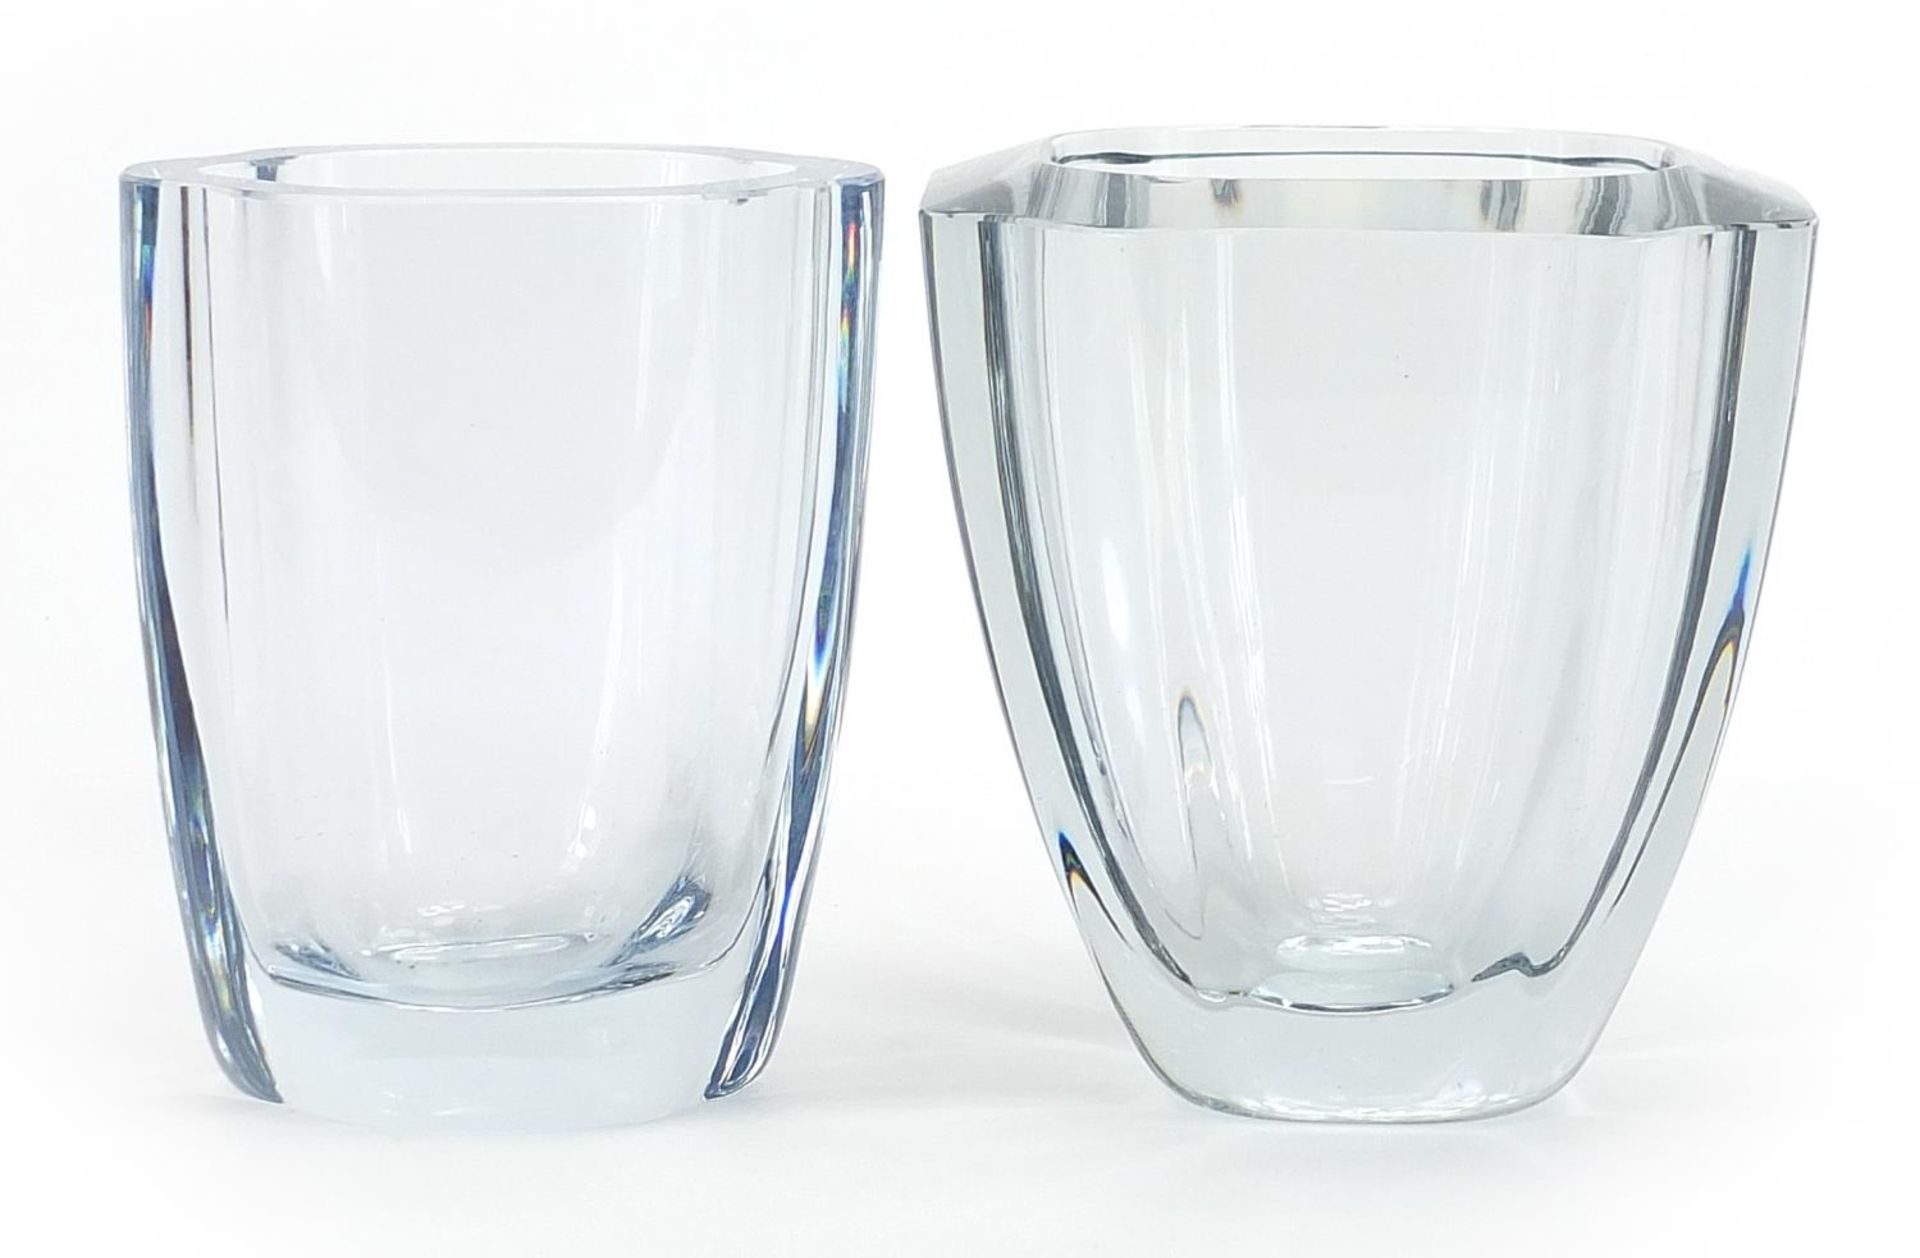 Stromberg, two Scandinavian pale blue glass vases, the largest 14.5cm high - Image 5 of 7